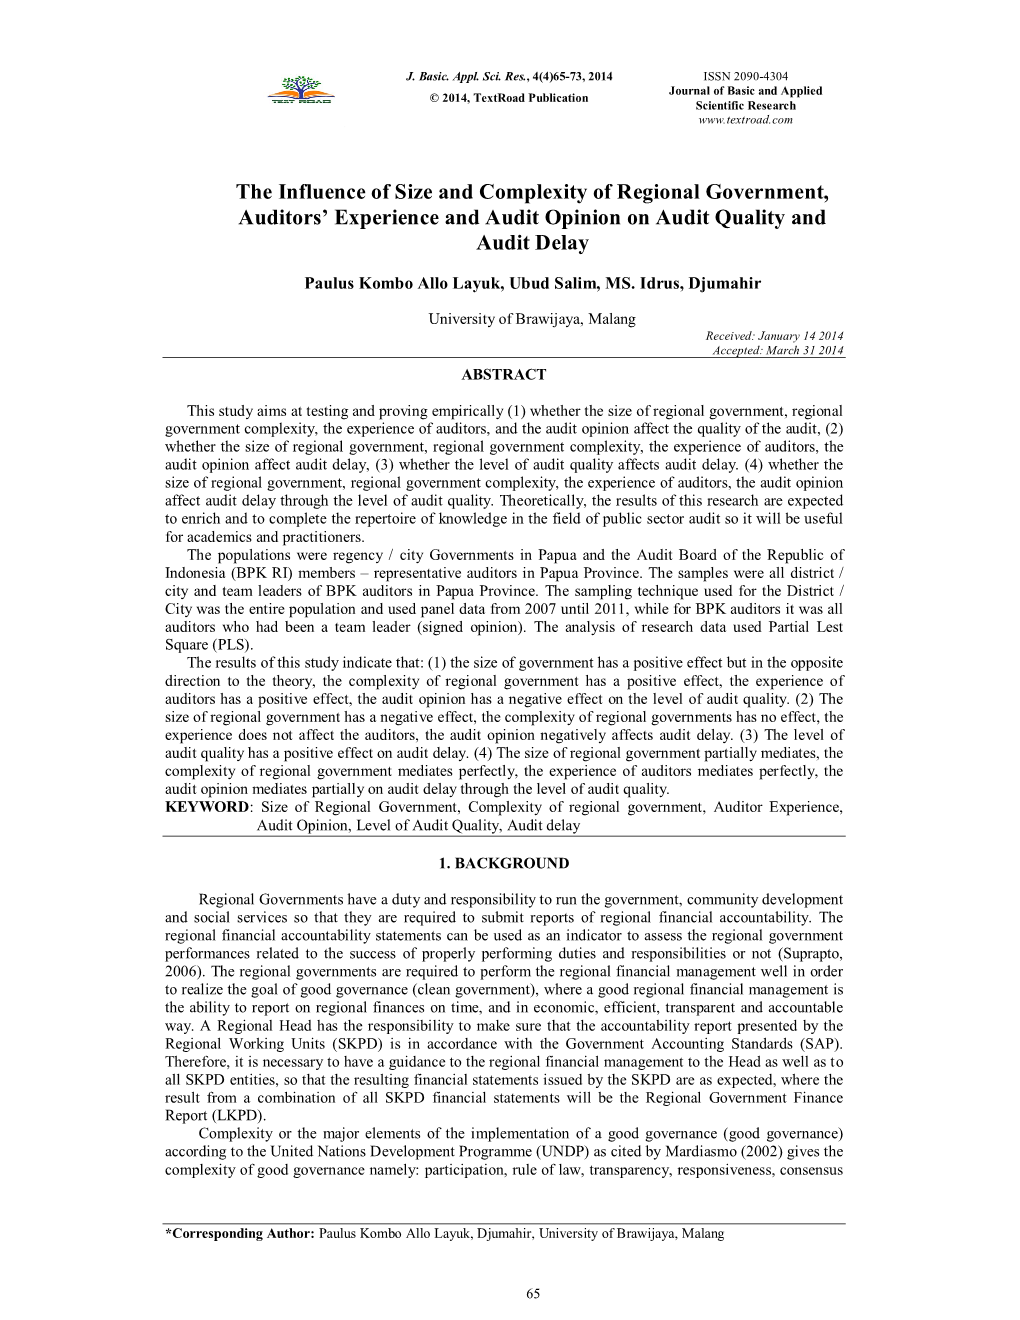 The Influence of Size and Complexity of Regional Government, Auditors’ Experience and Audit Opinion on Audit Quality and Audit Delay